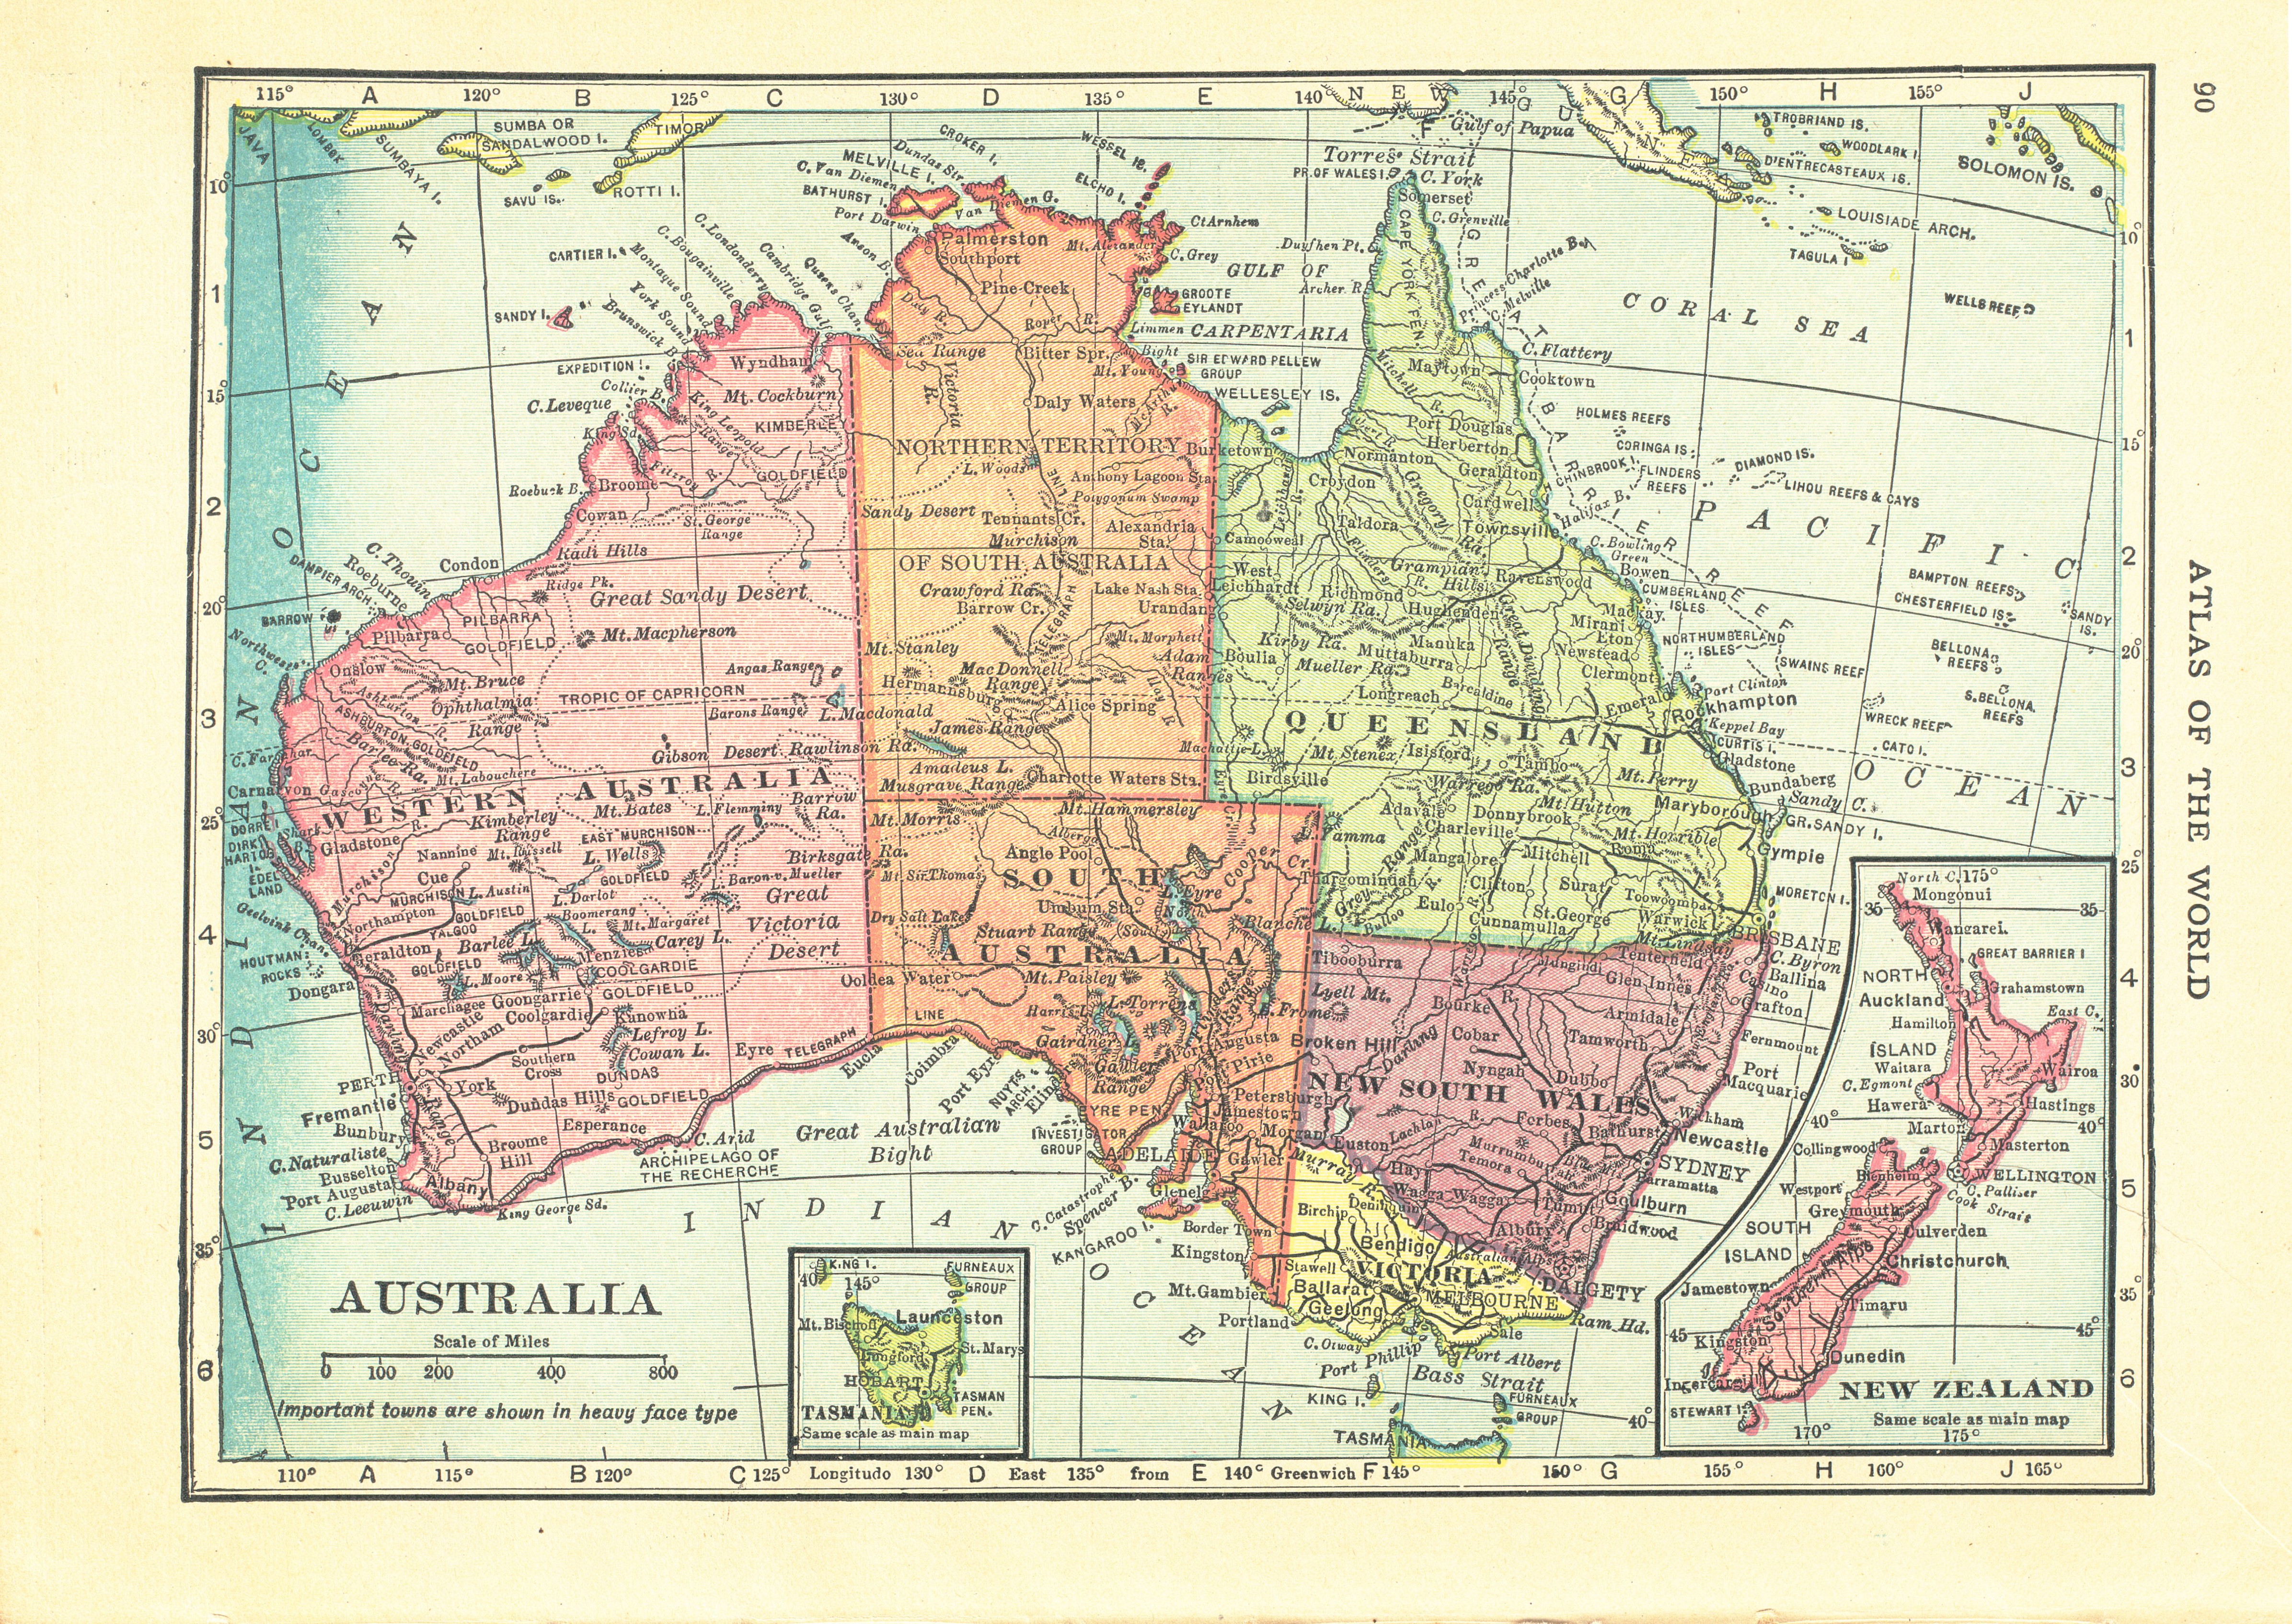 1911 Handy Atlas Vintage Map Pages - Australia on one side